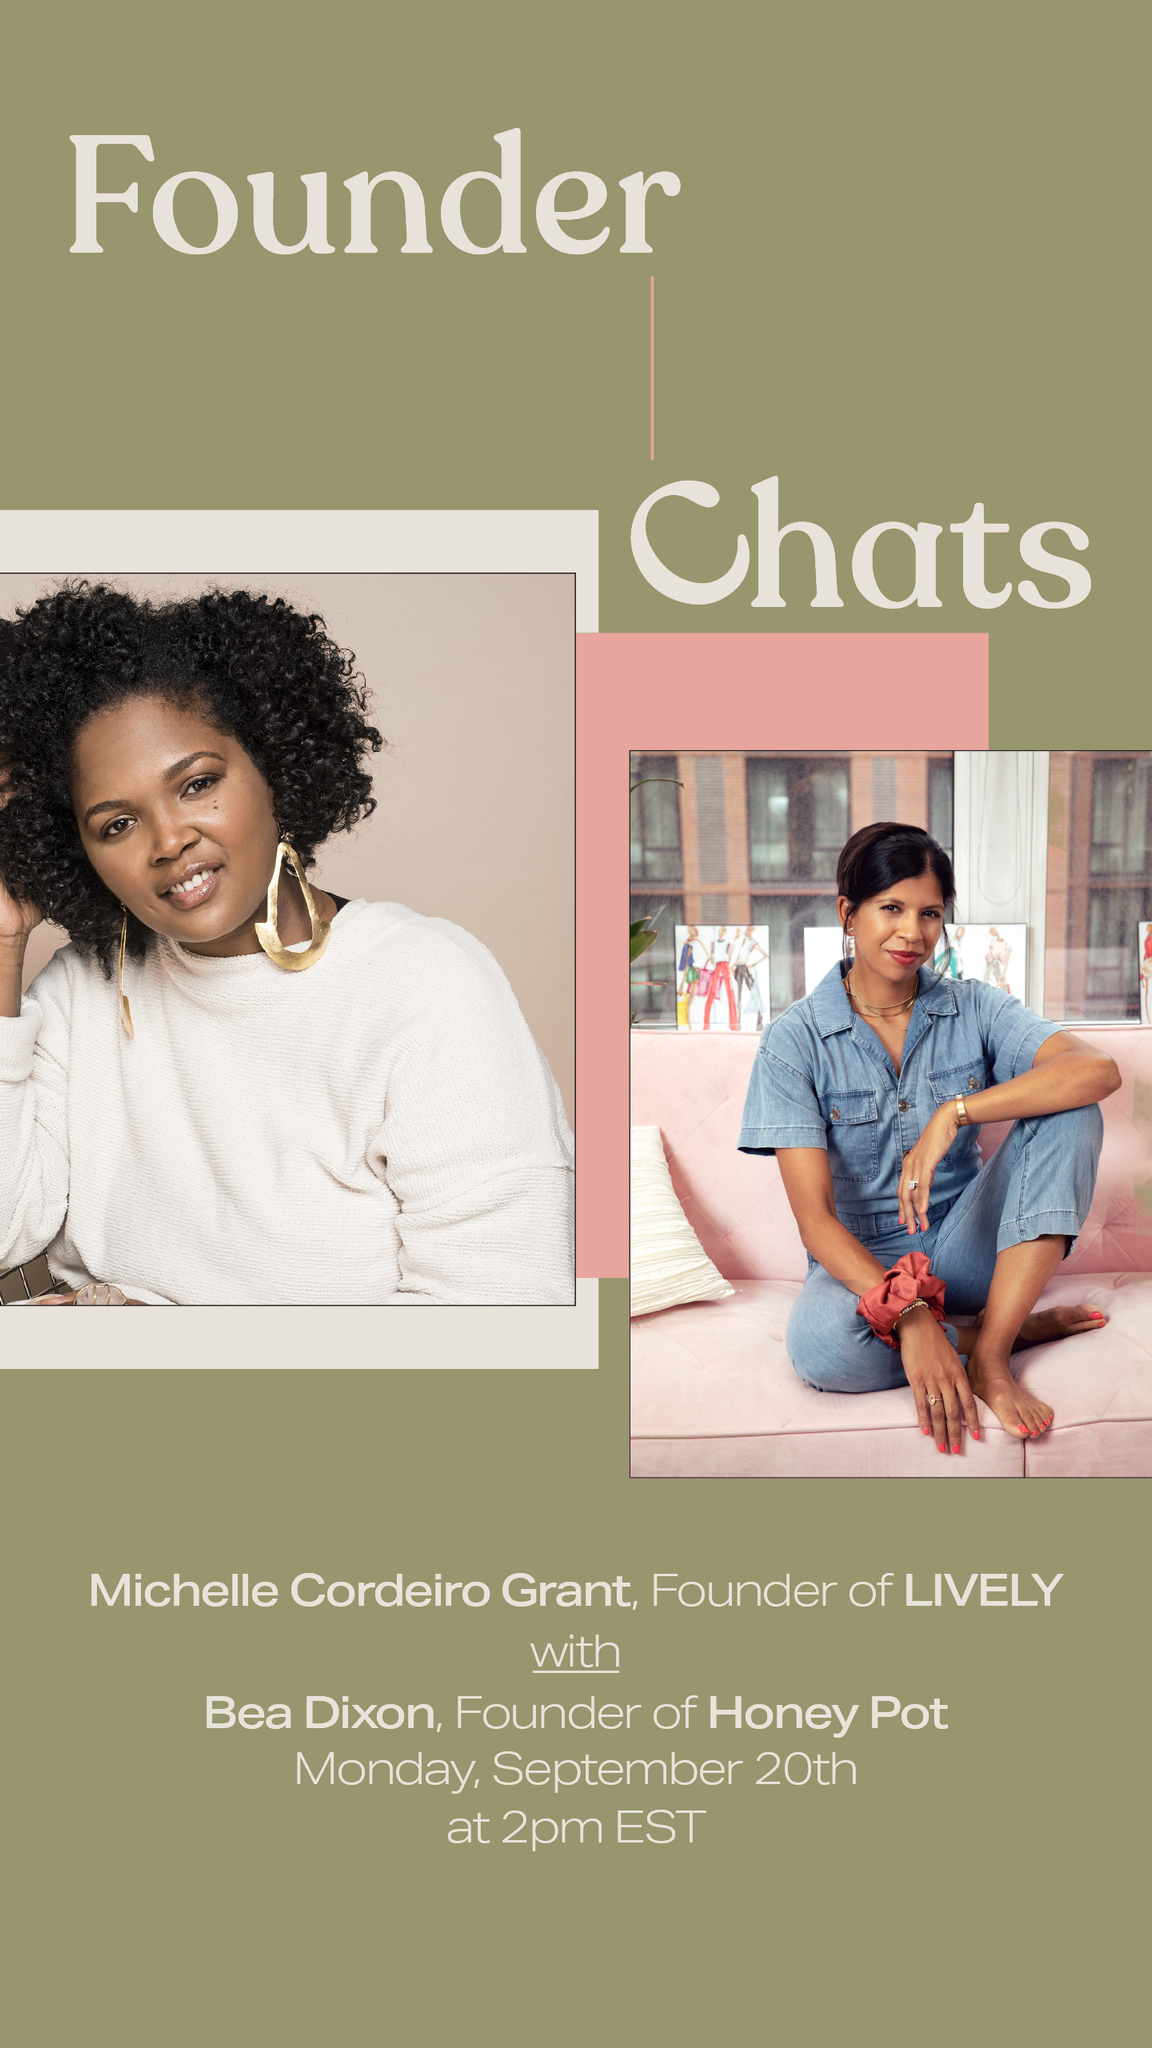 Founder Chats with Bea Dixon